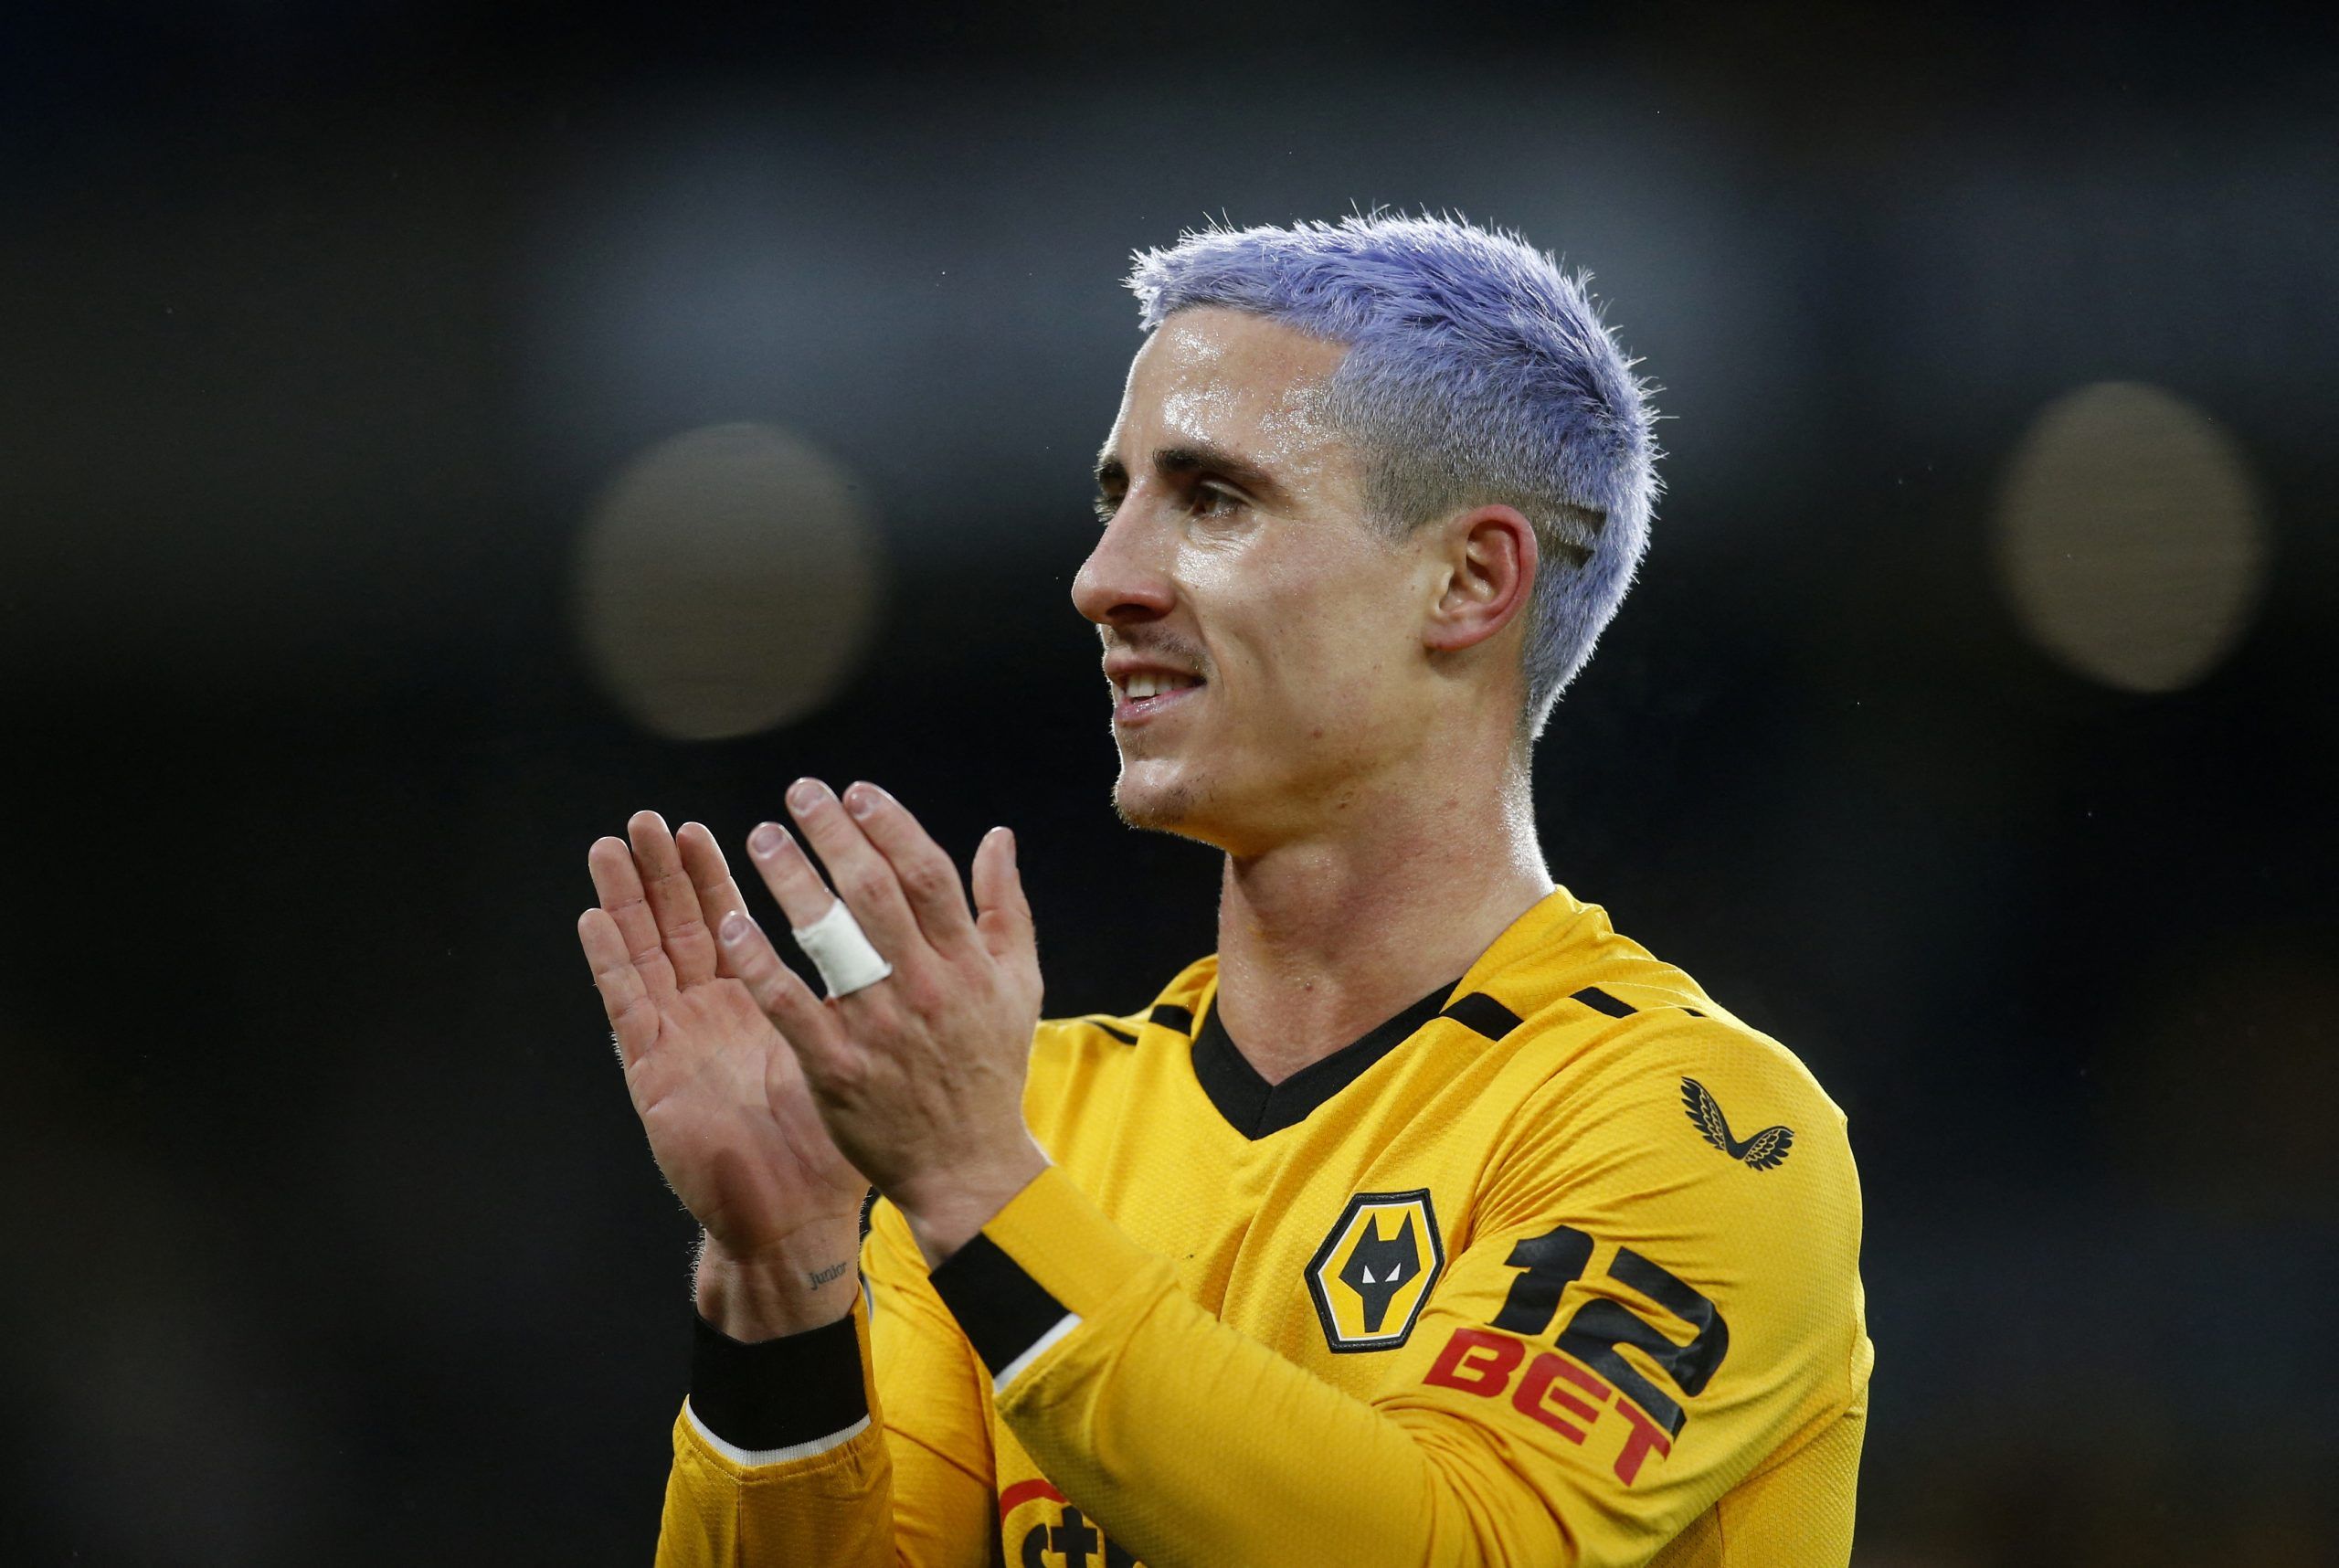 Soccer Football - Premier League - Wolverhampton Wanderers v Liverpool - Molineux Stadium, Wolverhampton, Britain - February 4, 2023 Wolverhampton Wanderers' Daniel Podence celebrates after the match Action Images via Reuters/Ed Sykes EDITORIAL USE ONLY. No use with unauthorized audio, video, data, fixture lists, club/league logos or 'live' services. Online in-match use limited to 75 images, no video emulation. No use in betting, games or single club /league/player publications.  Please contact 